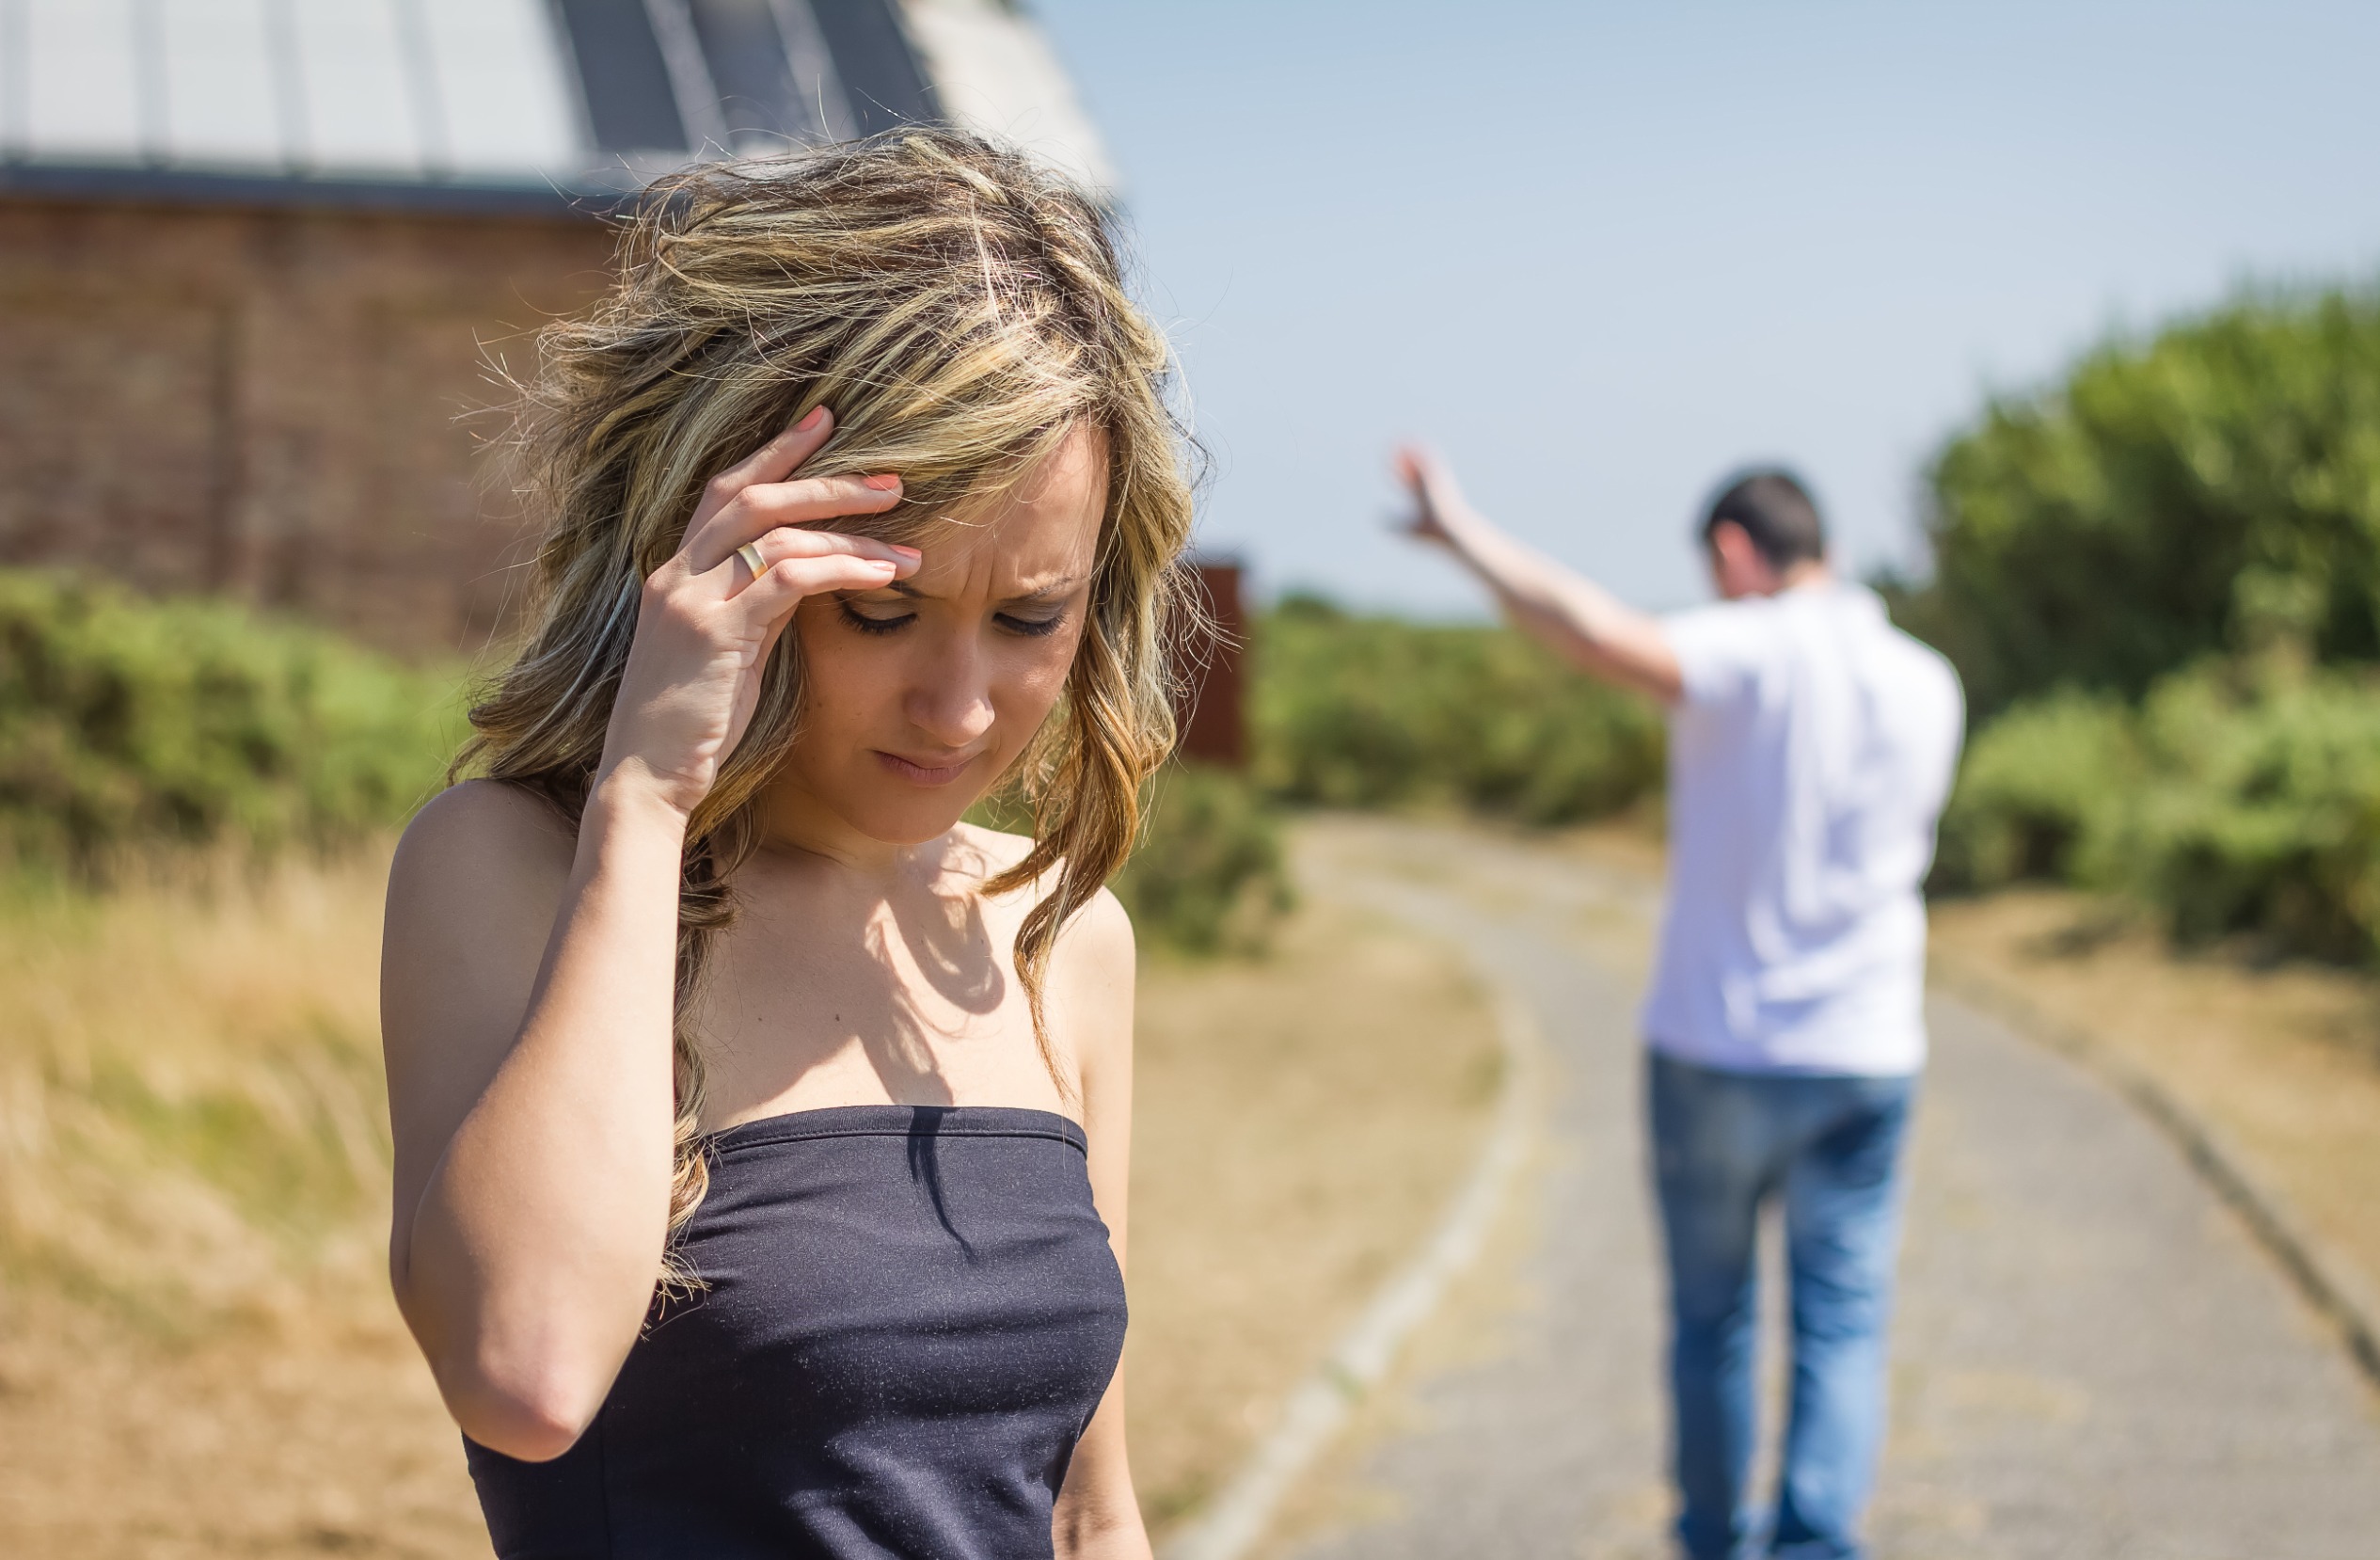 What to Look for When You Suspect Your Spouse is Battling Addiction